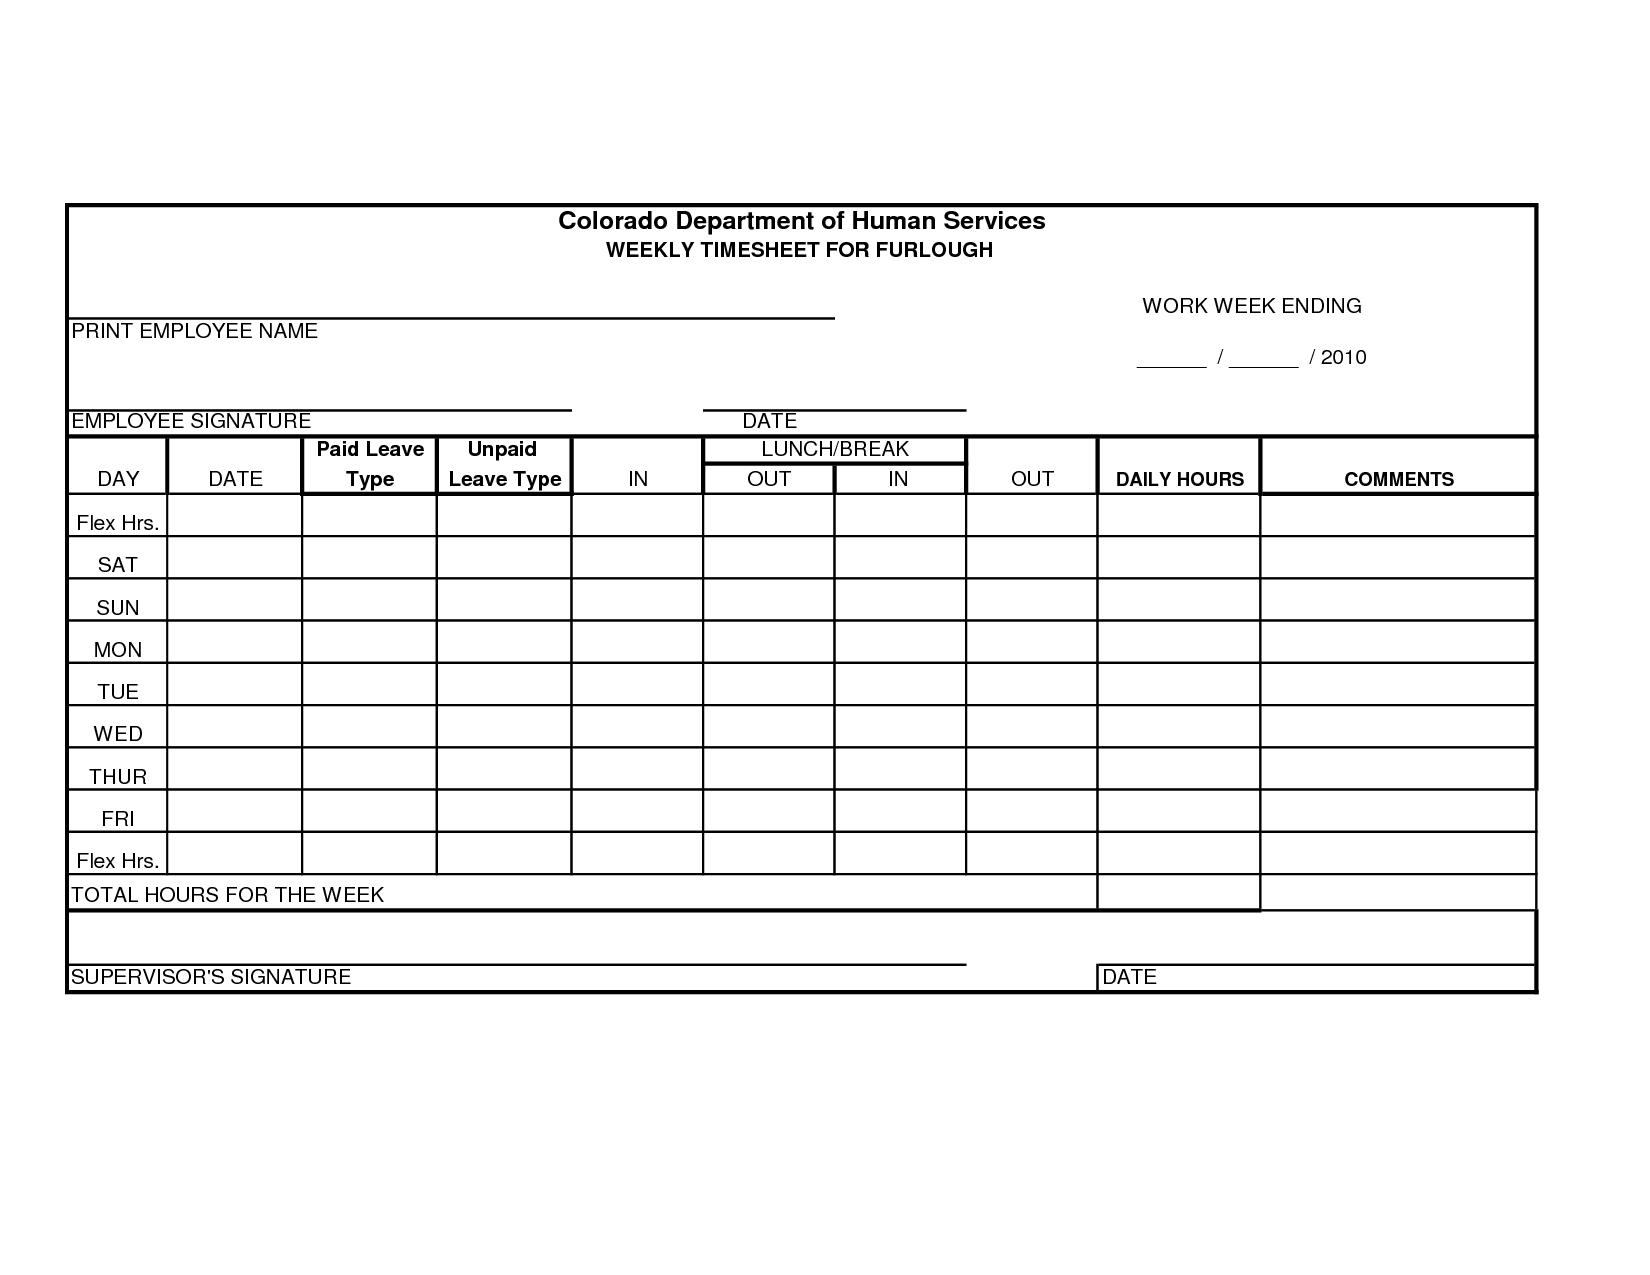 Time Sheets Template New Free Printable Time Sheets Forms Furlough - Free Printable Time Sheets